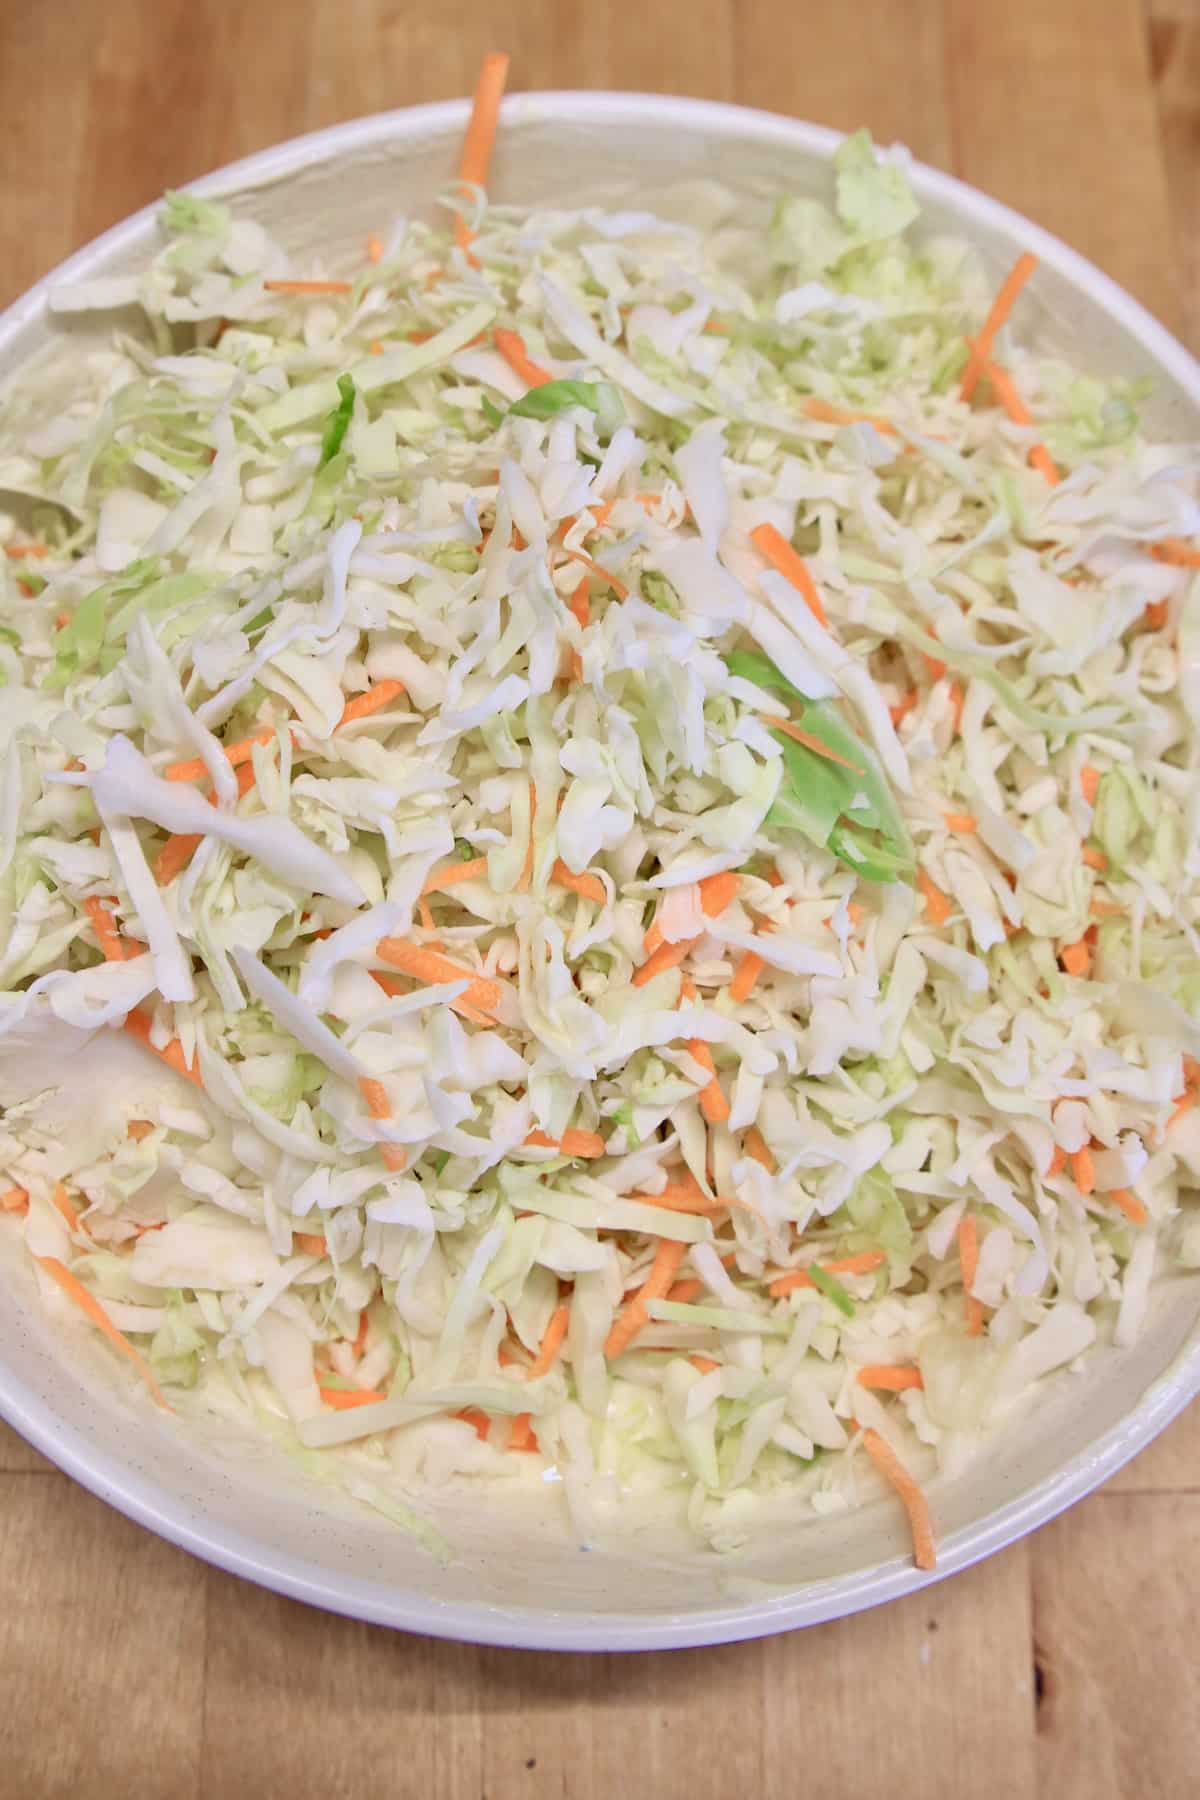 Shredded cabbage and carrots in a bowl with slaw dressing.